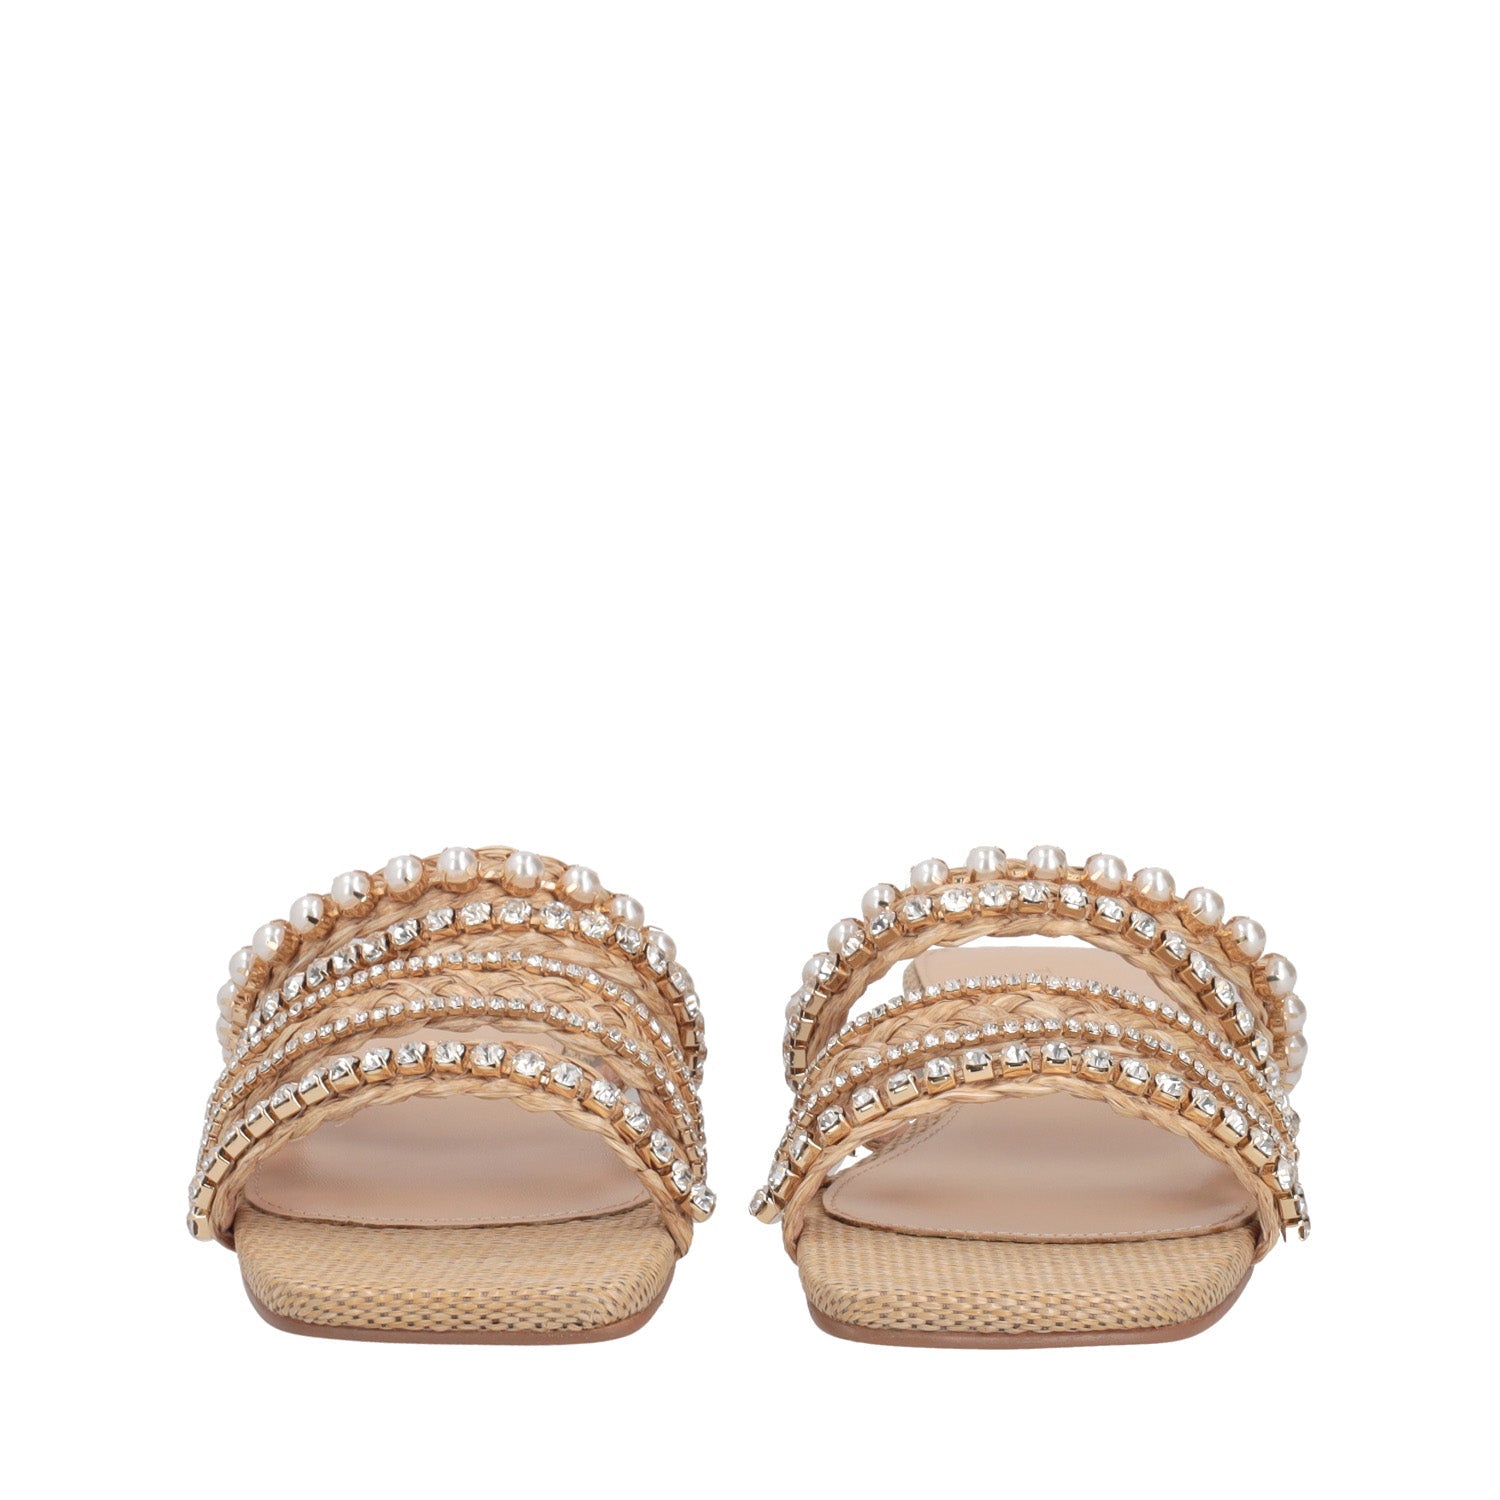 TAN FRIDA SLIPPERS WITH RHINESTONES AND PEARLS